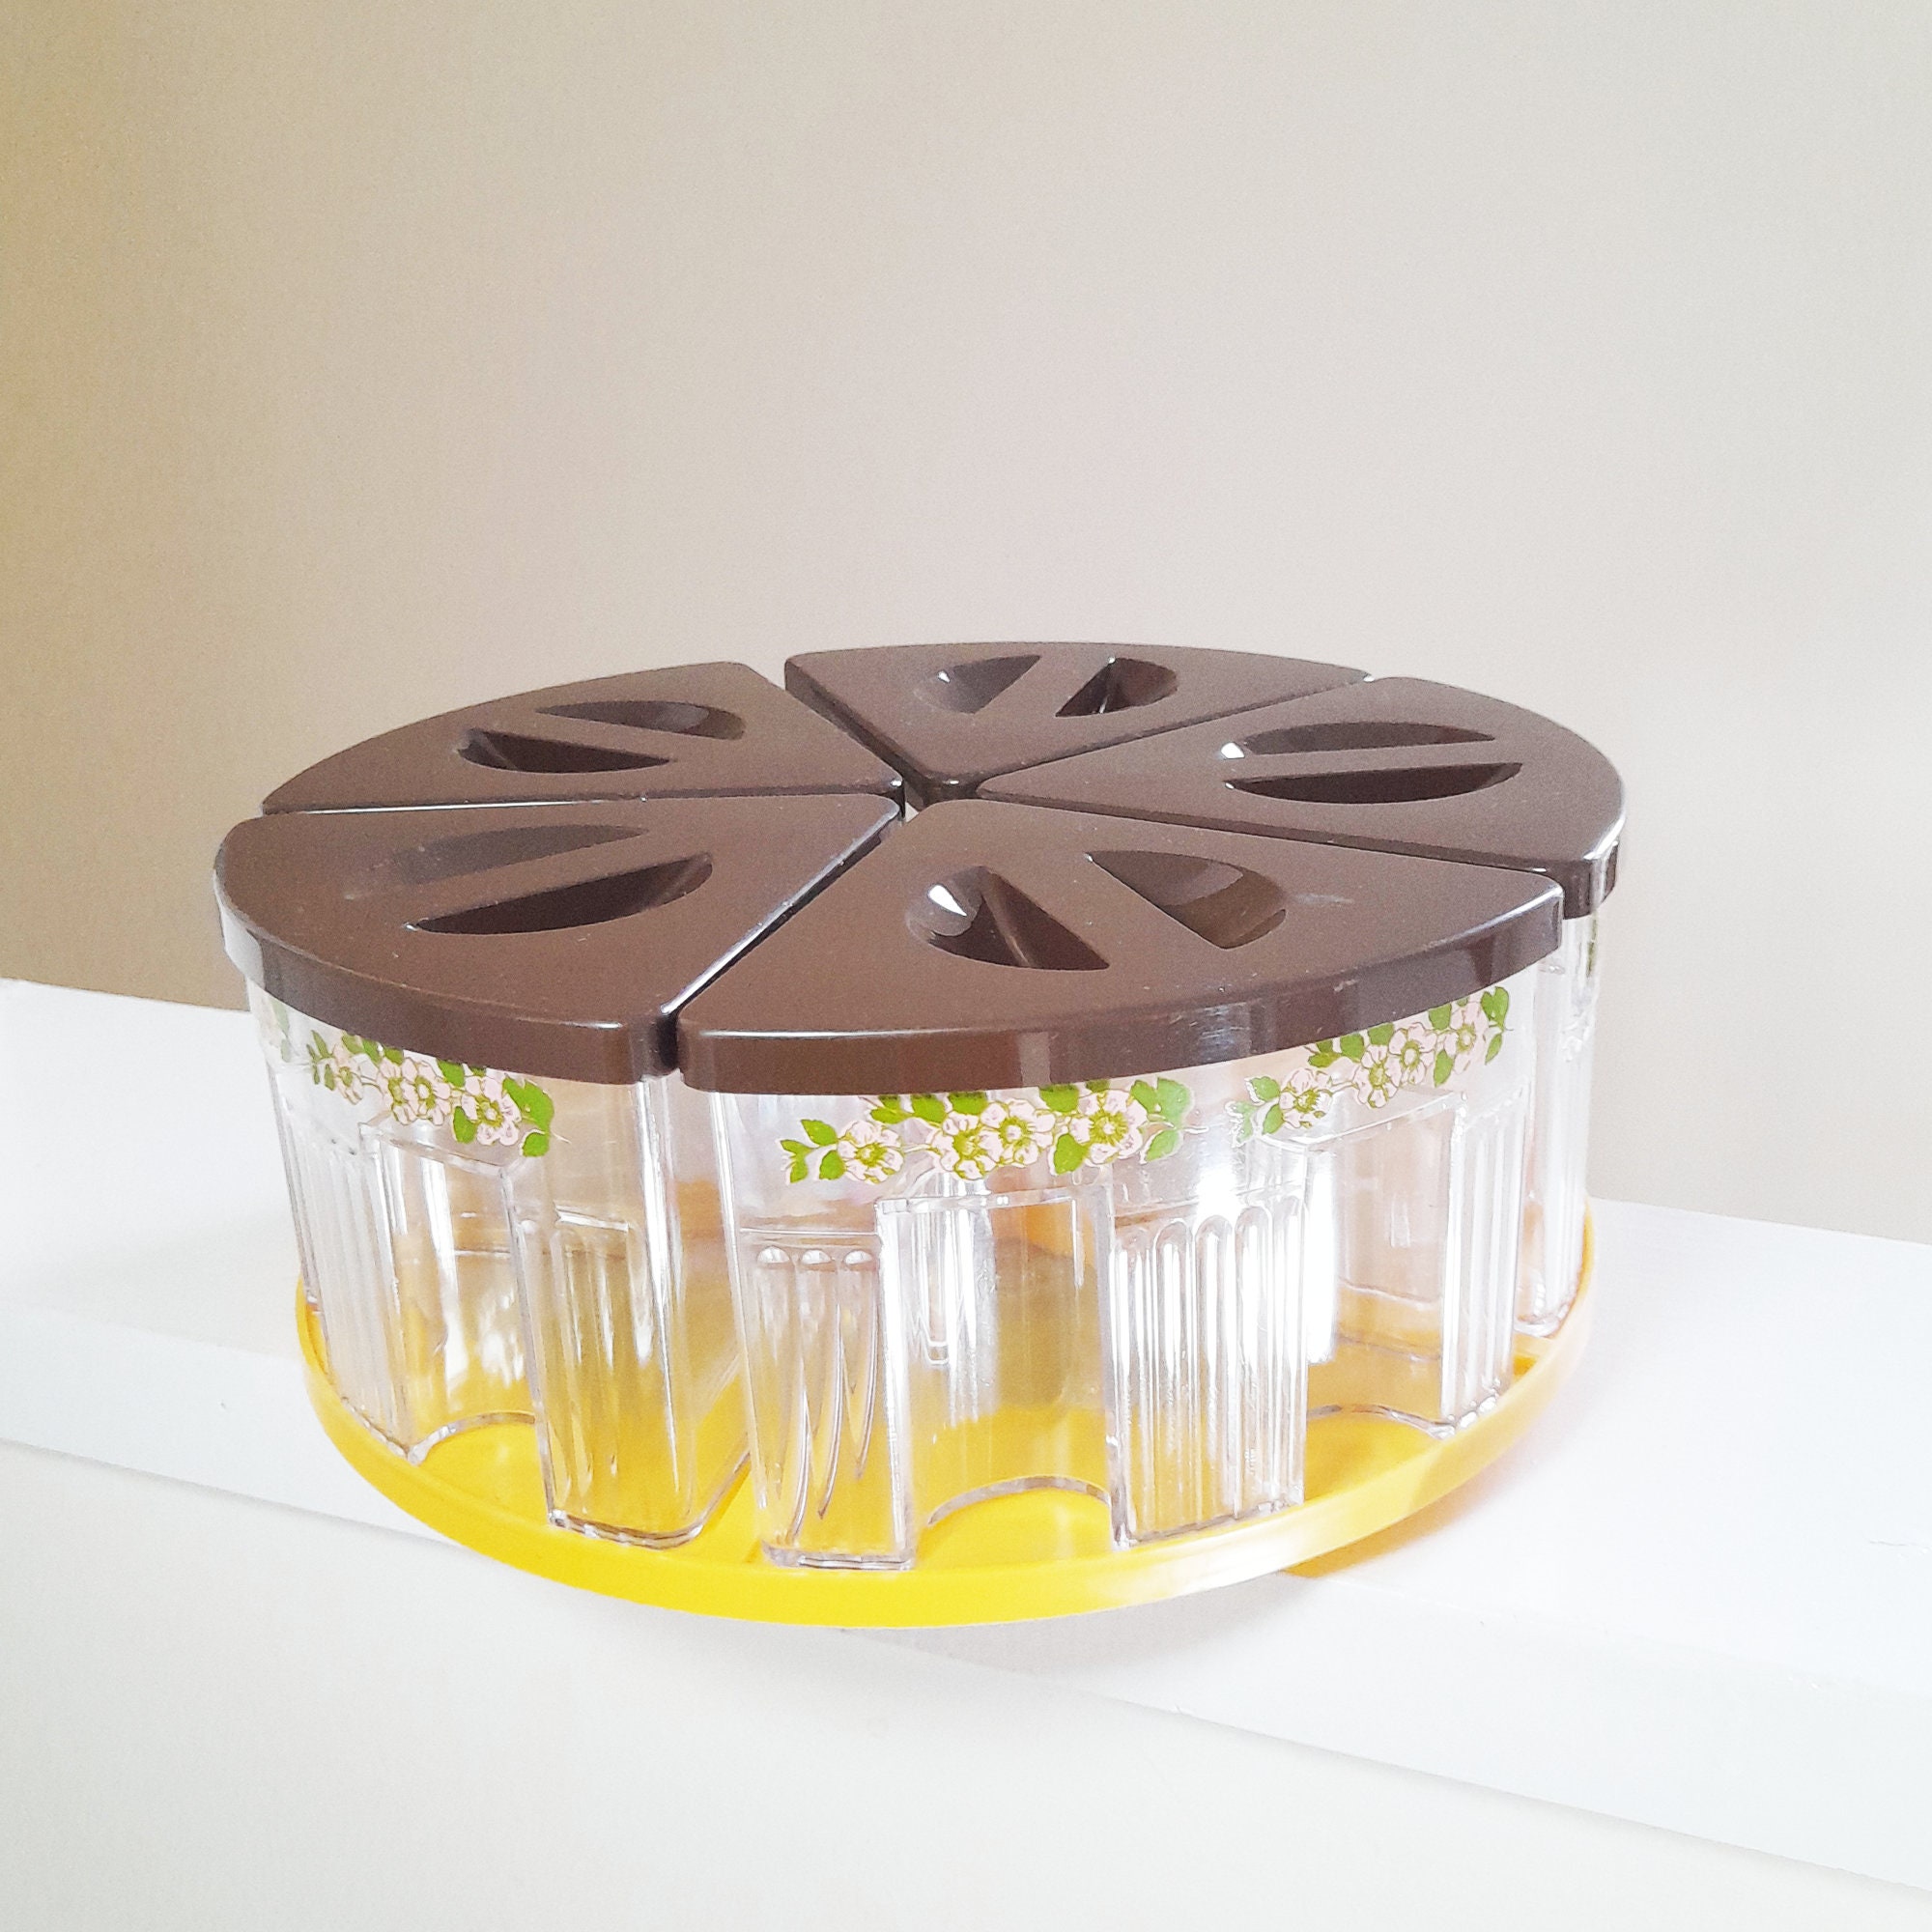 Vintage Plastic Rubbermaid Cake Stand With Lazy Susan Feature, Retro  Rubbermaid Revolving Cake Stand. 